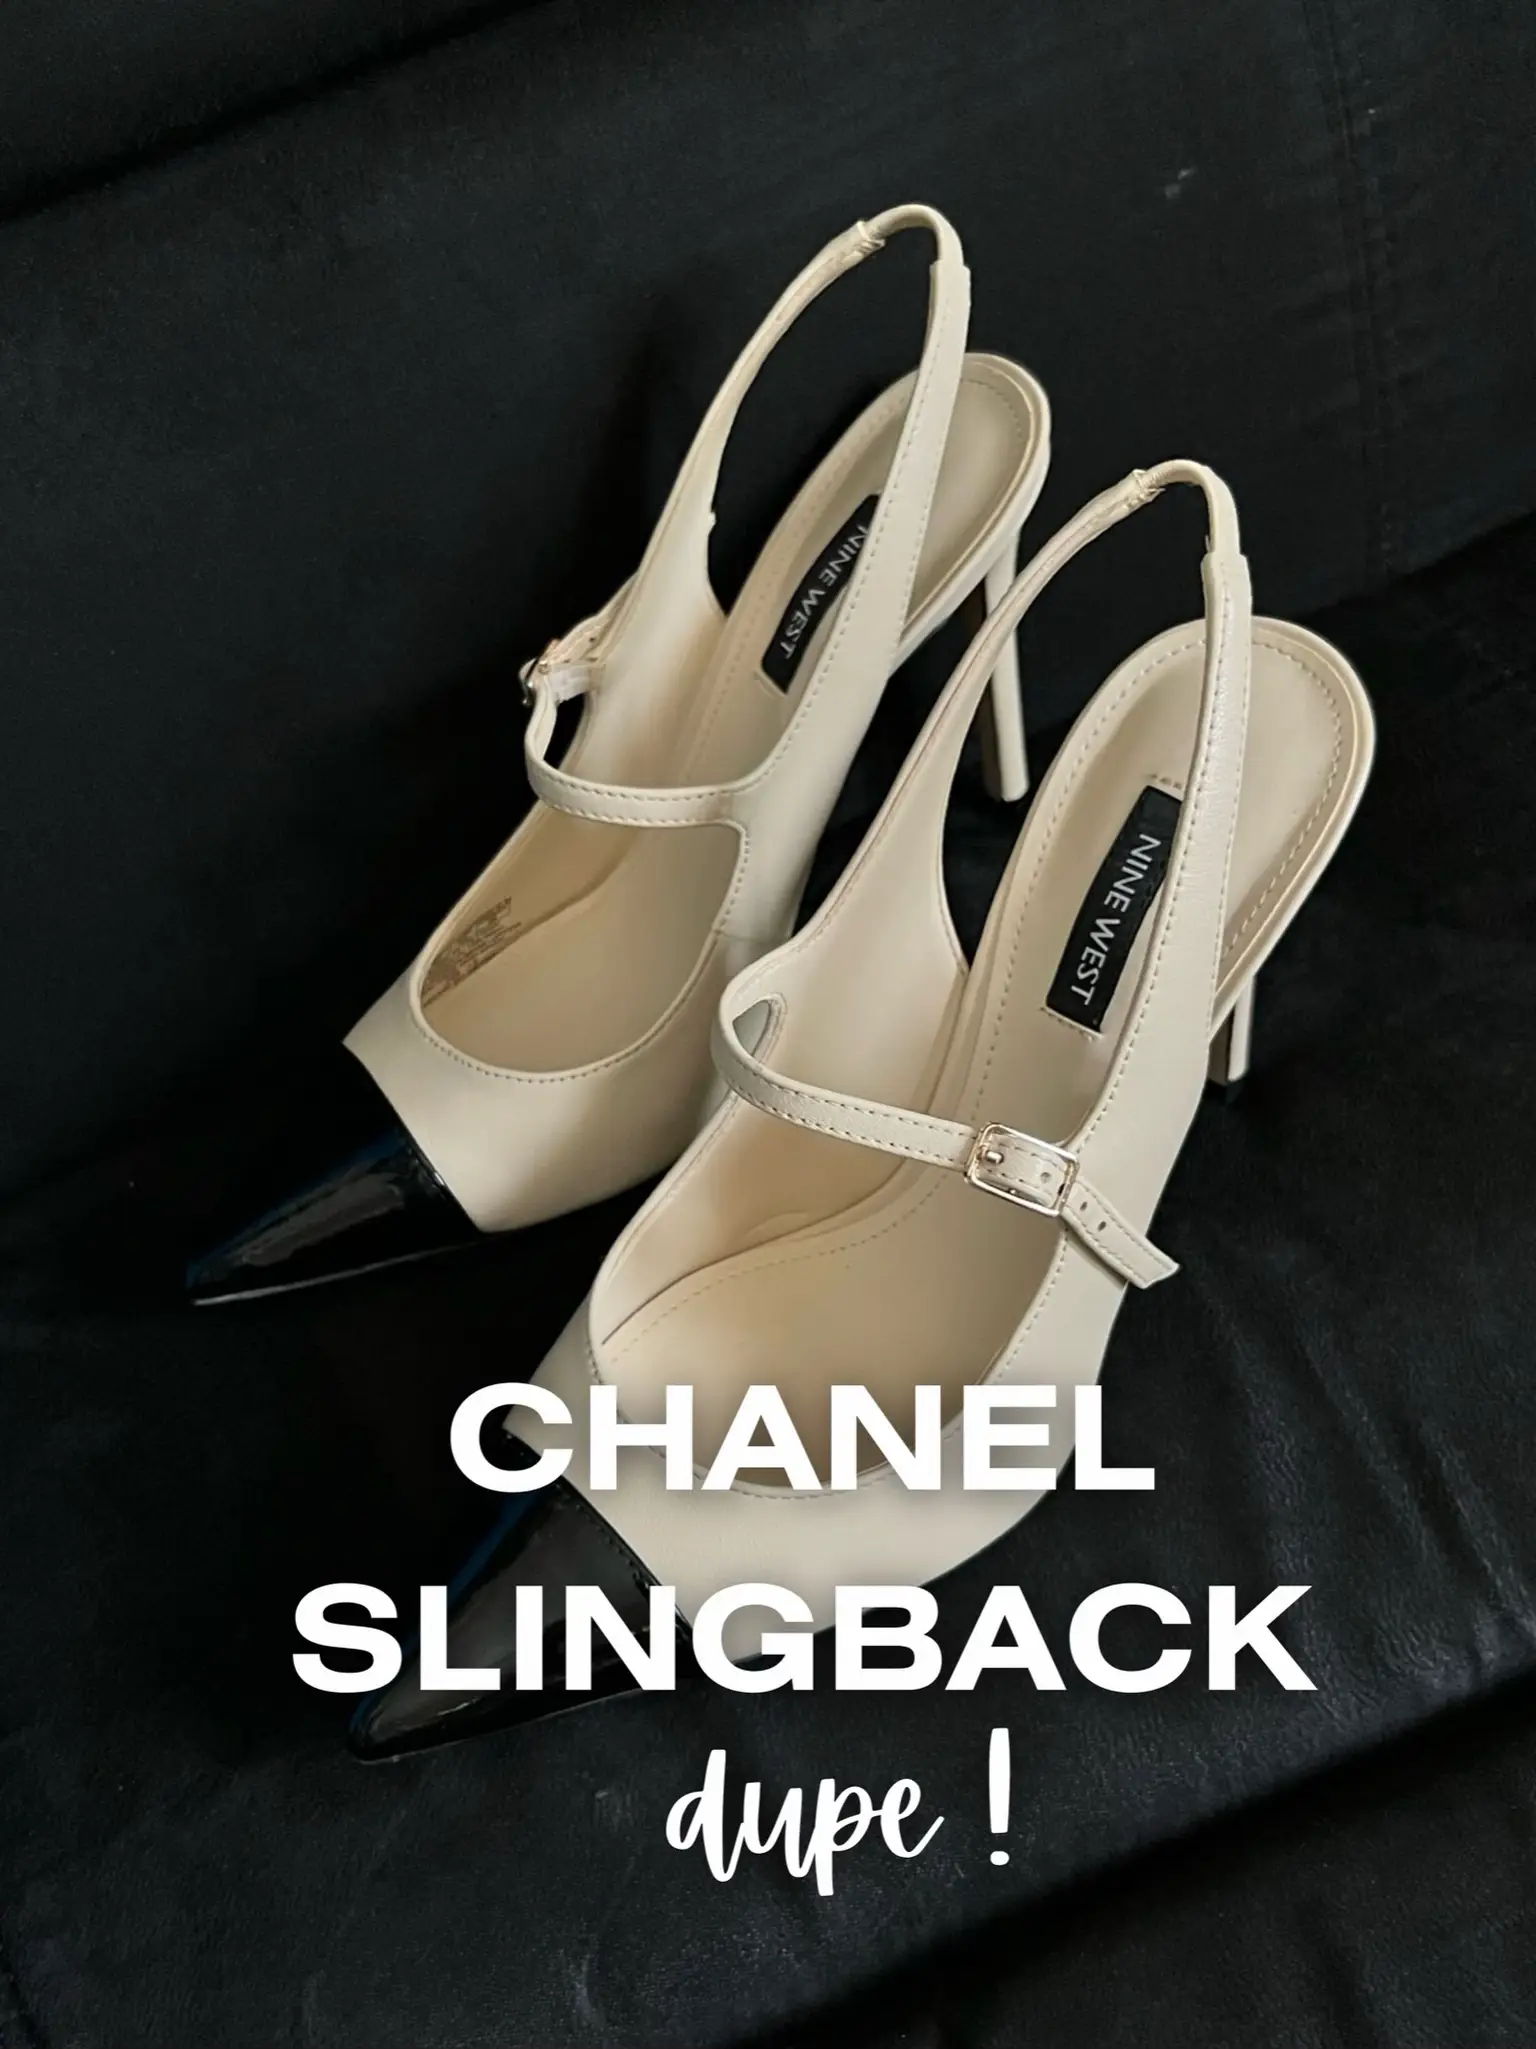 dupe dari Chanel Slingback Heels😎👠, Gallery posted by NADYSHA